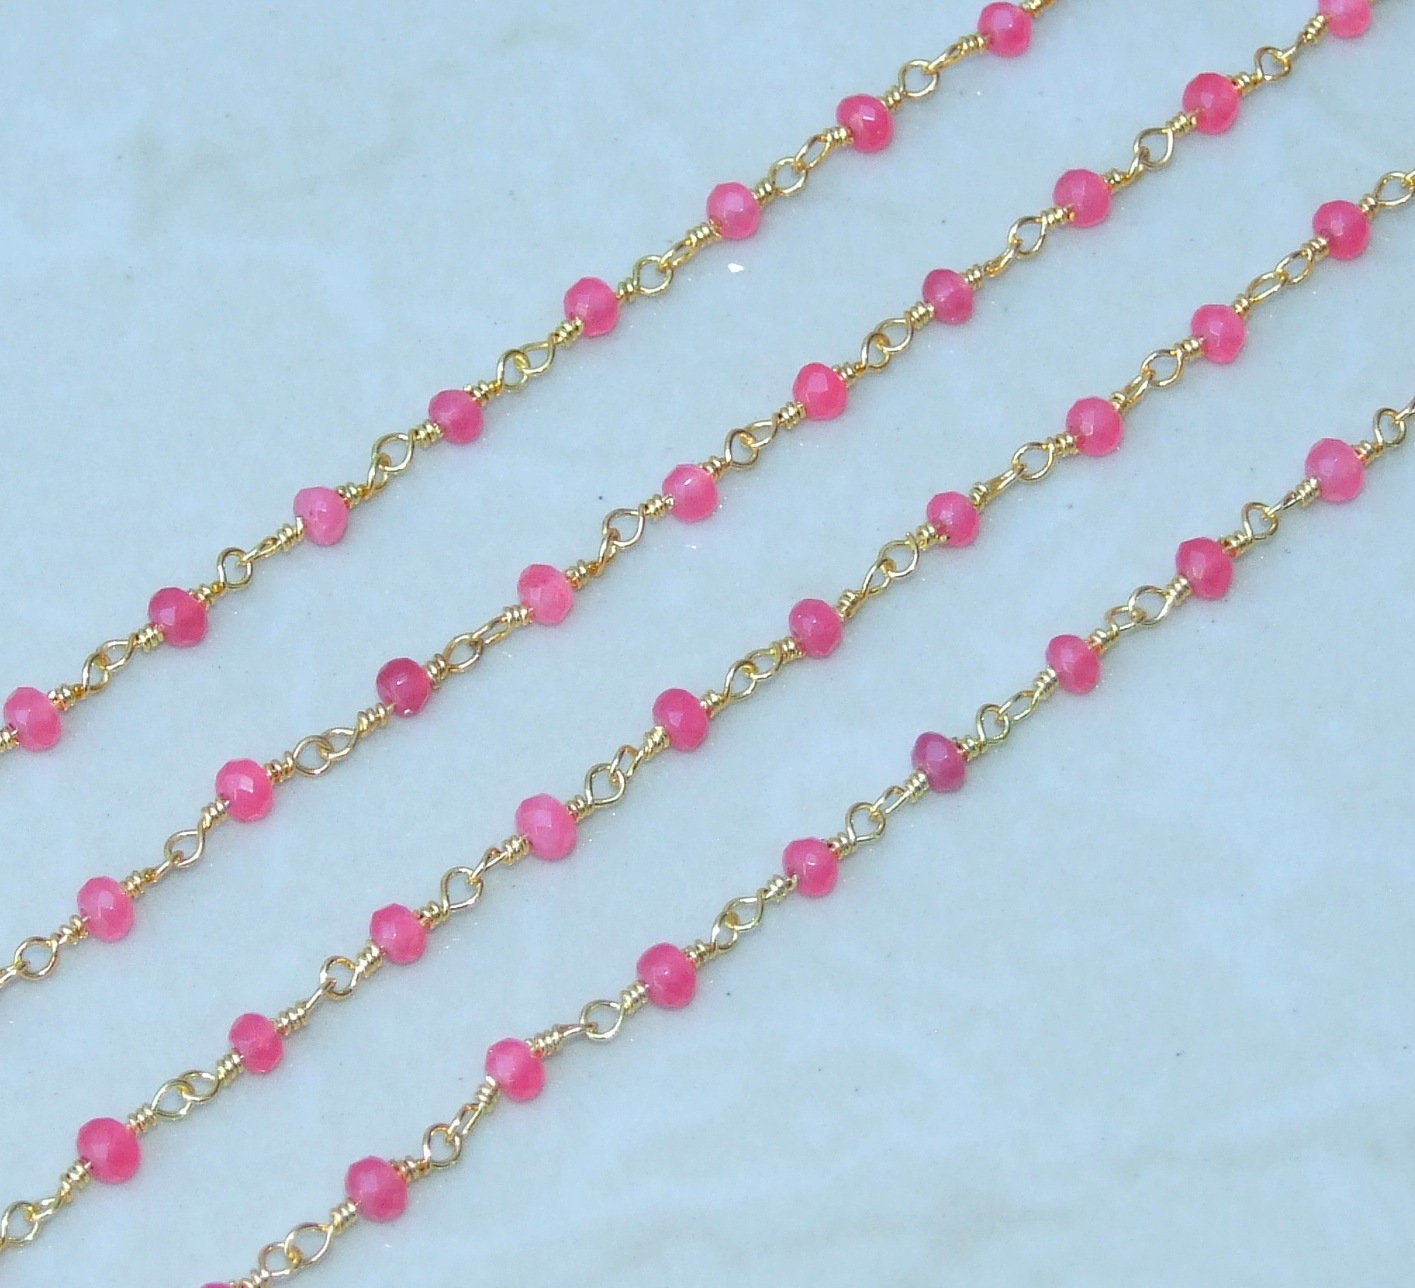 Pink Jade Faceted Rondelle Bead Rosary Chain, Bulk Chain, Wire Wrapped, Beaded Chain, Body Chain, Gold Chain, Necklace Chain, Belly Chain